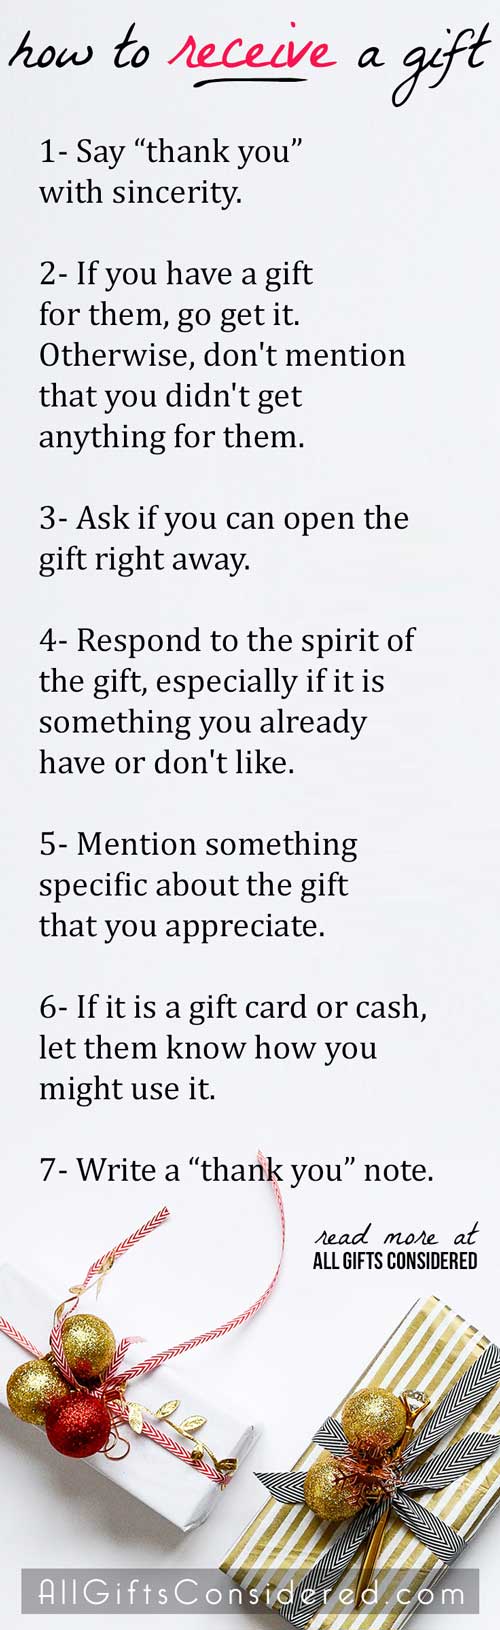 Gift Etiquette for When You Receive a Gift